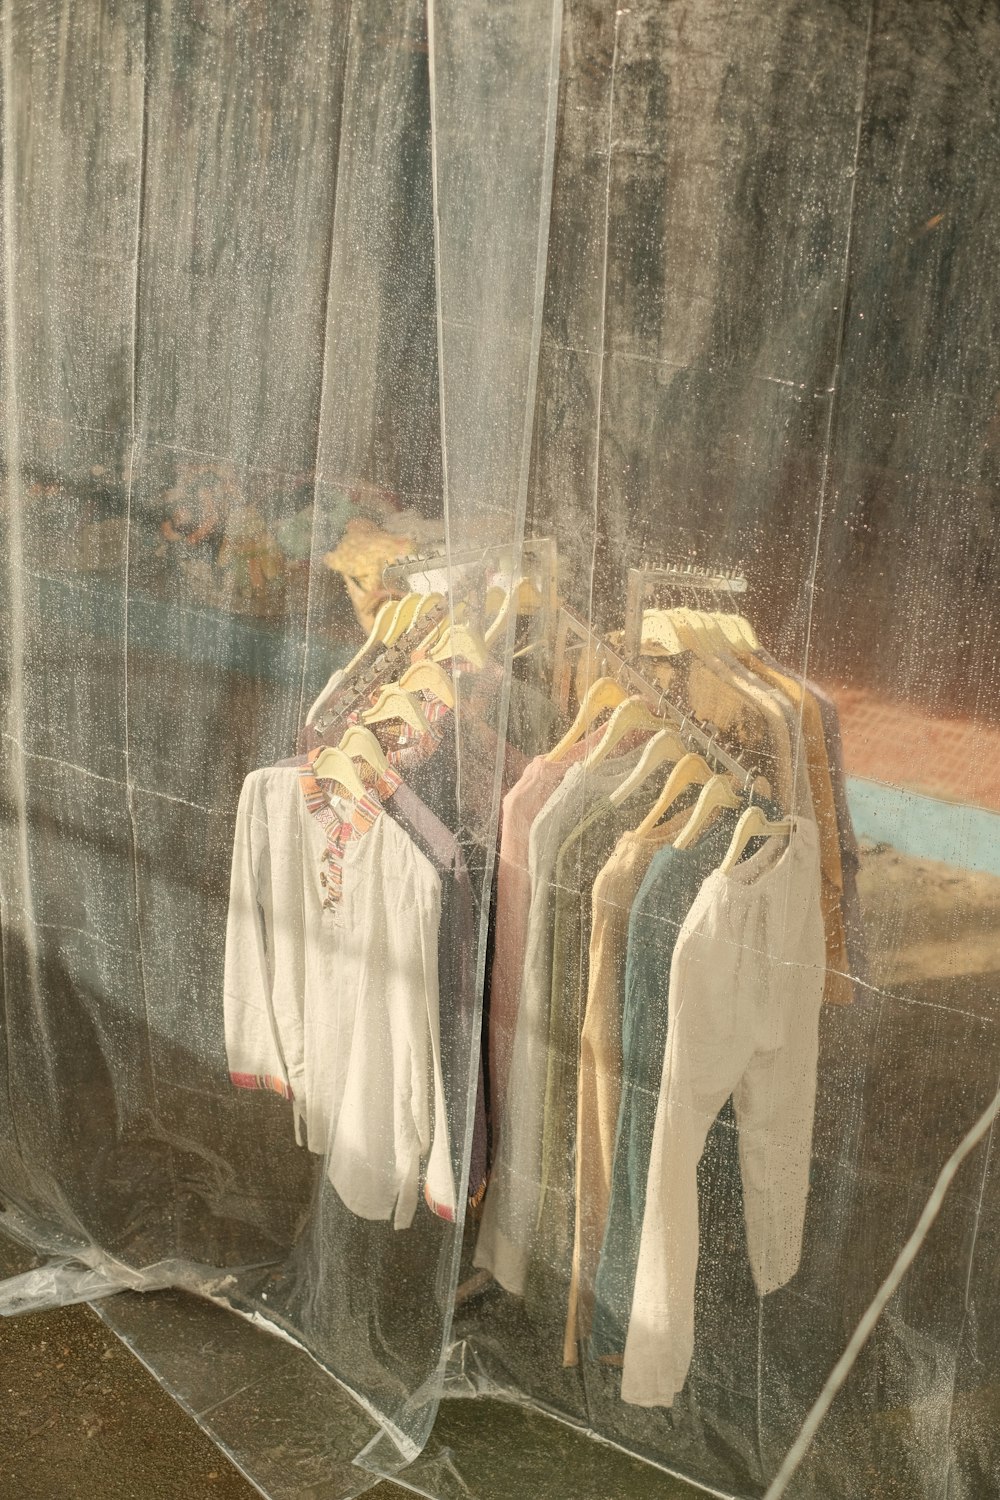 a rack of clothes in front of a sheer curtain